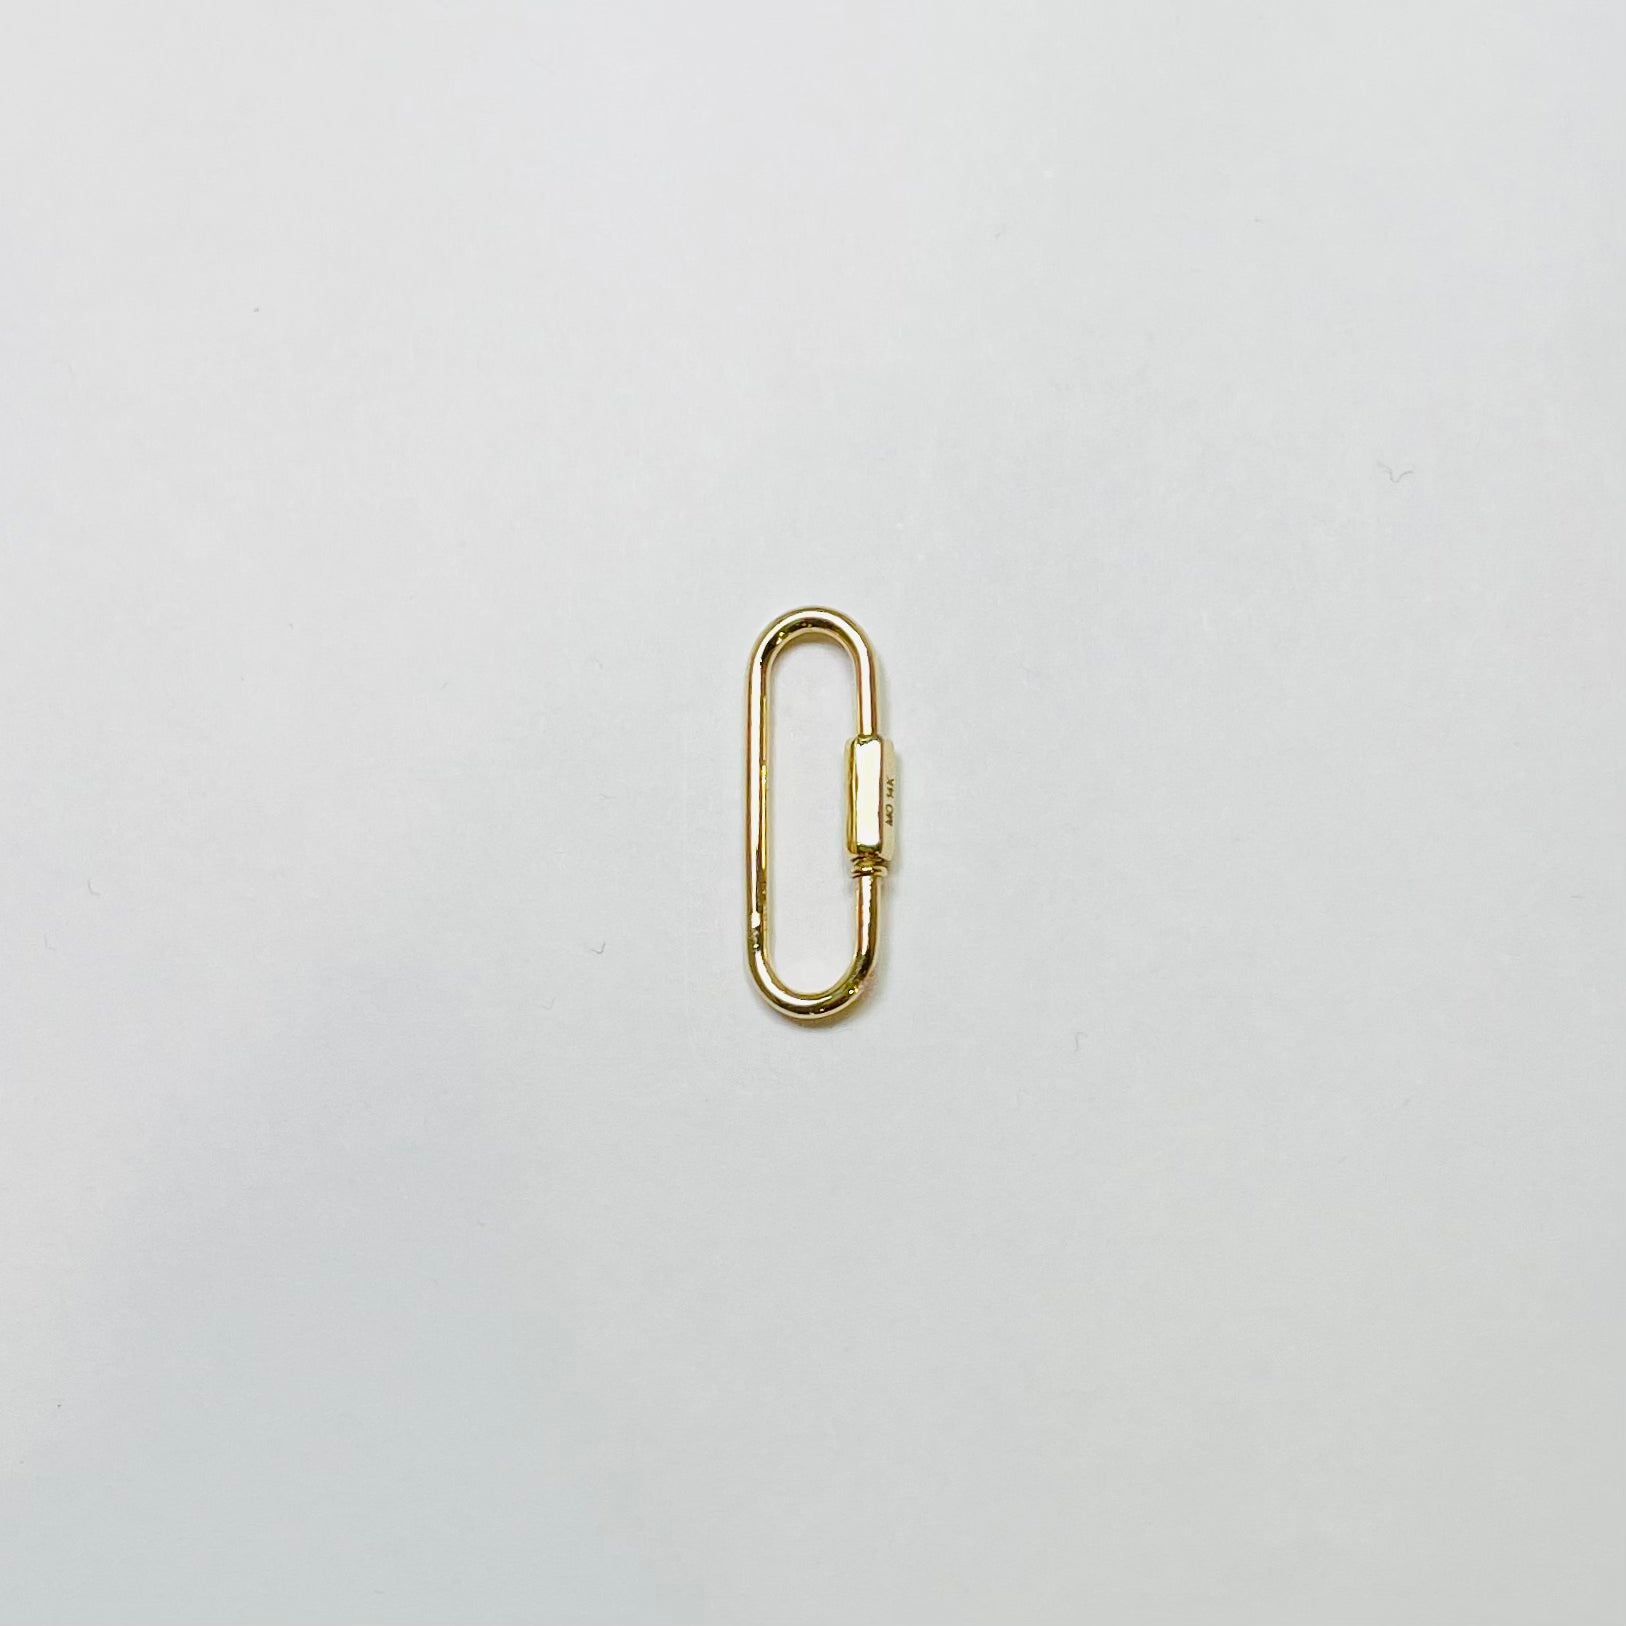 gold carabiner connector